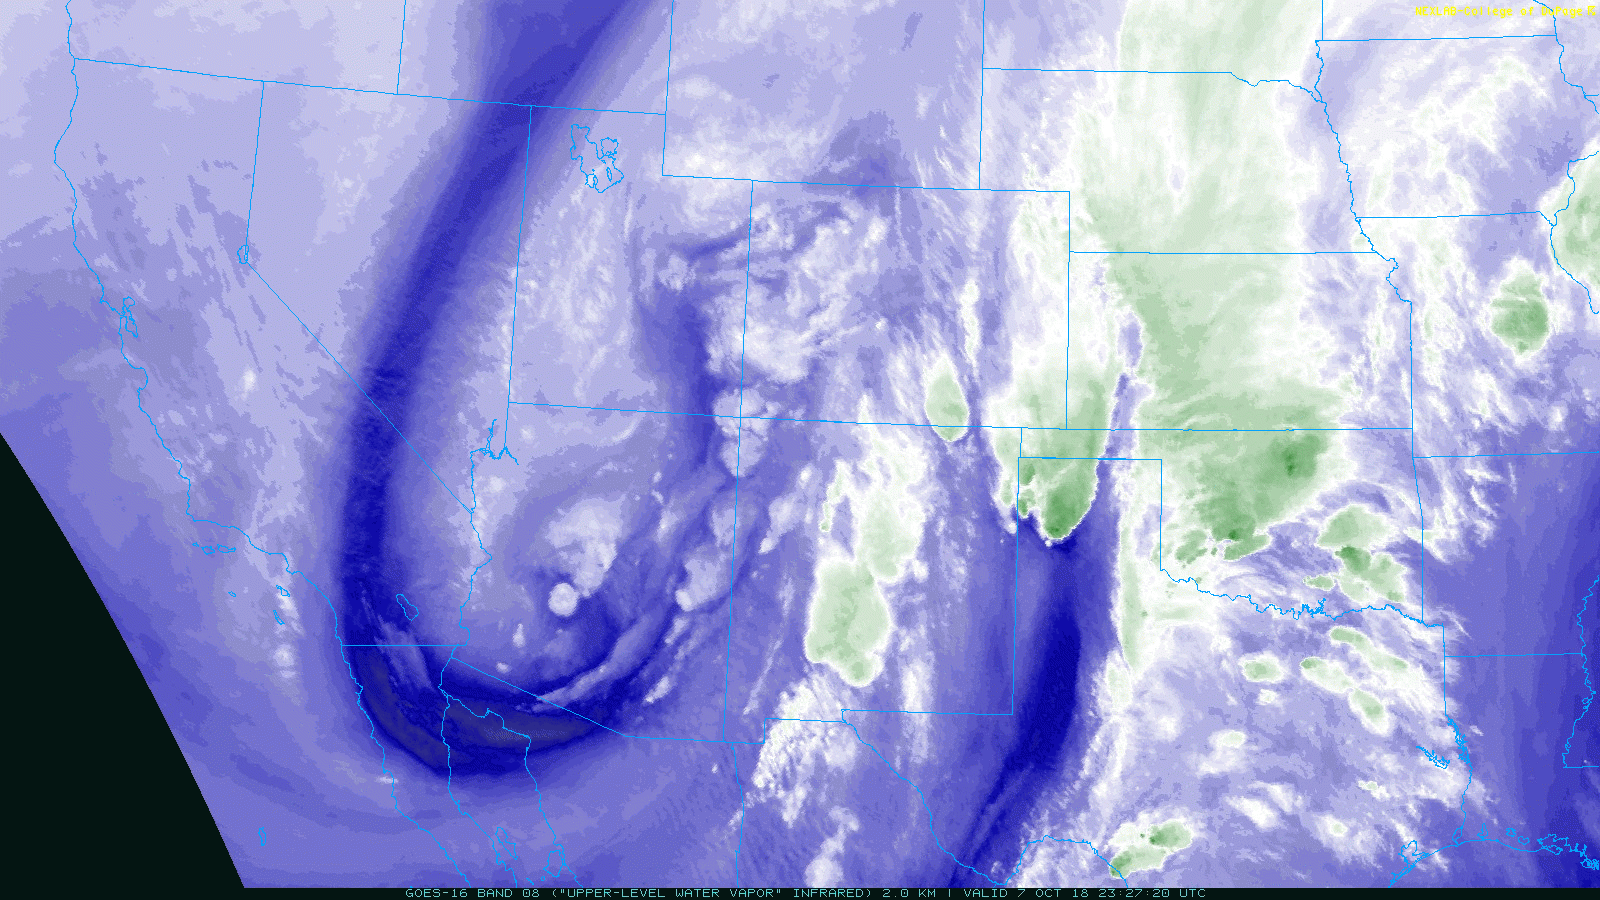 Water vapor imagery captured at 6:27 pm on 7 October 2018. 